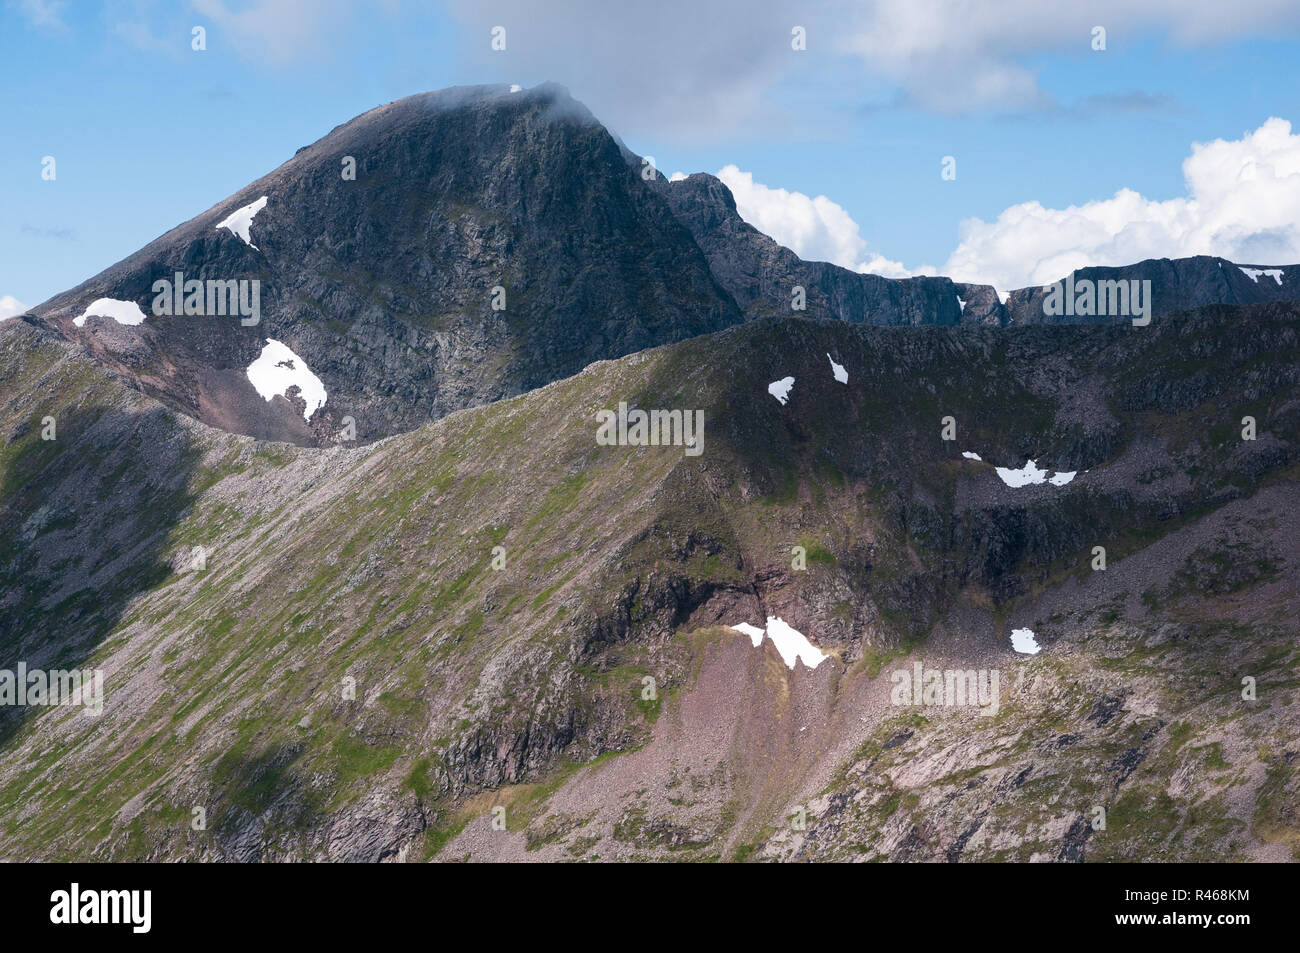 North face of Ben Nevis, highest mountain in the British Isles, Scotland Stock Photo